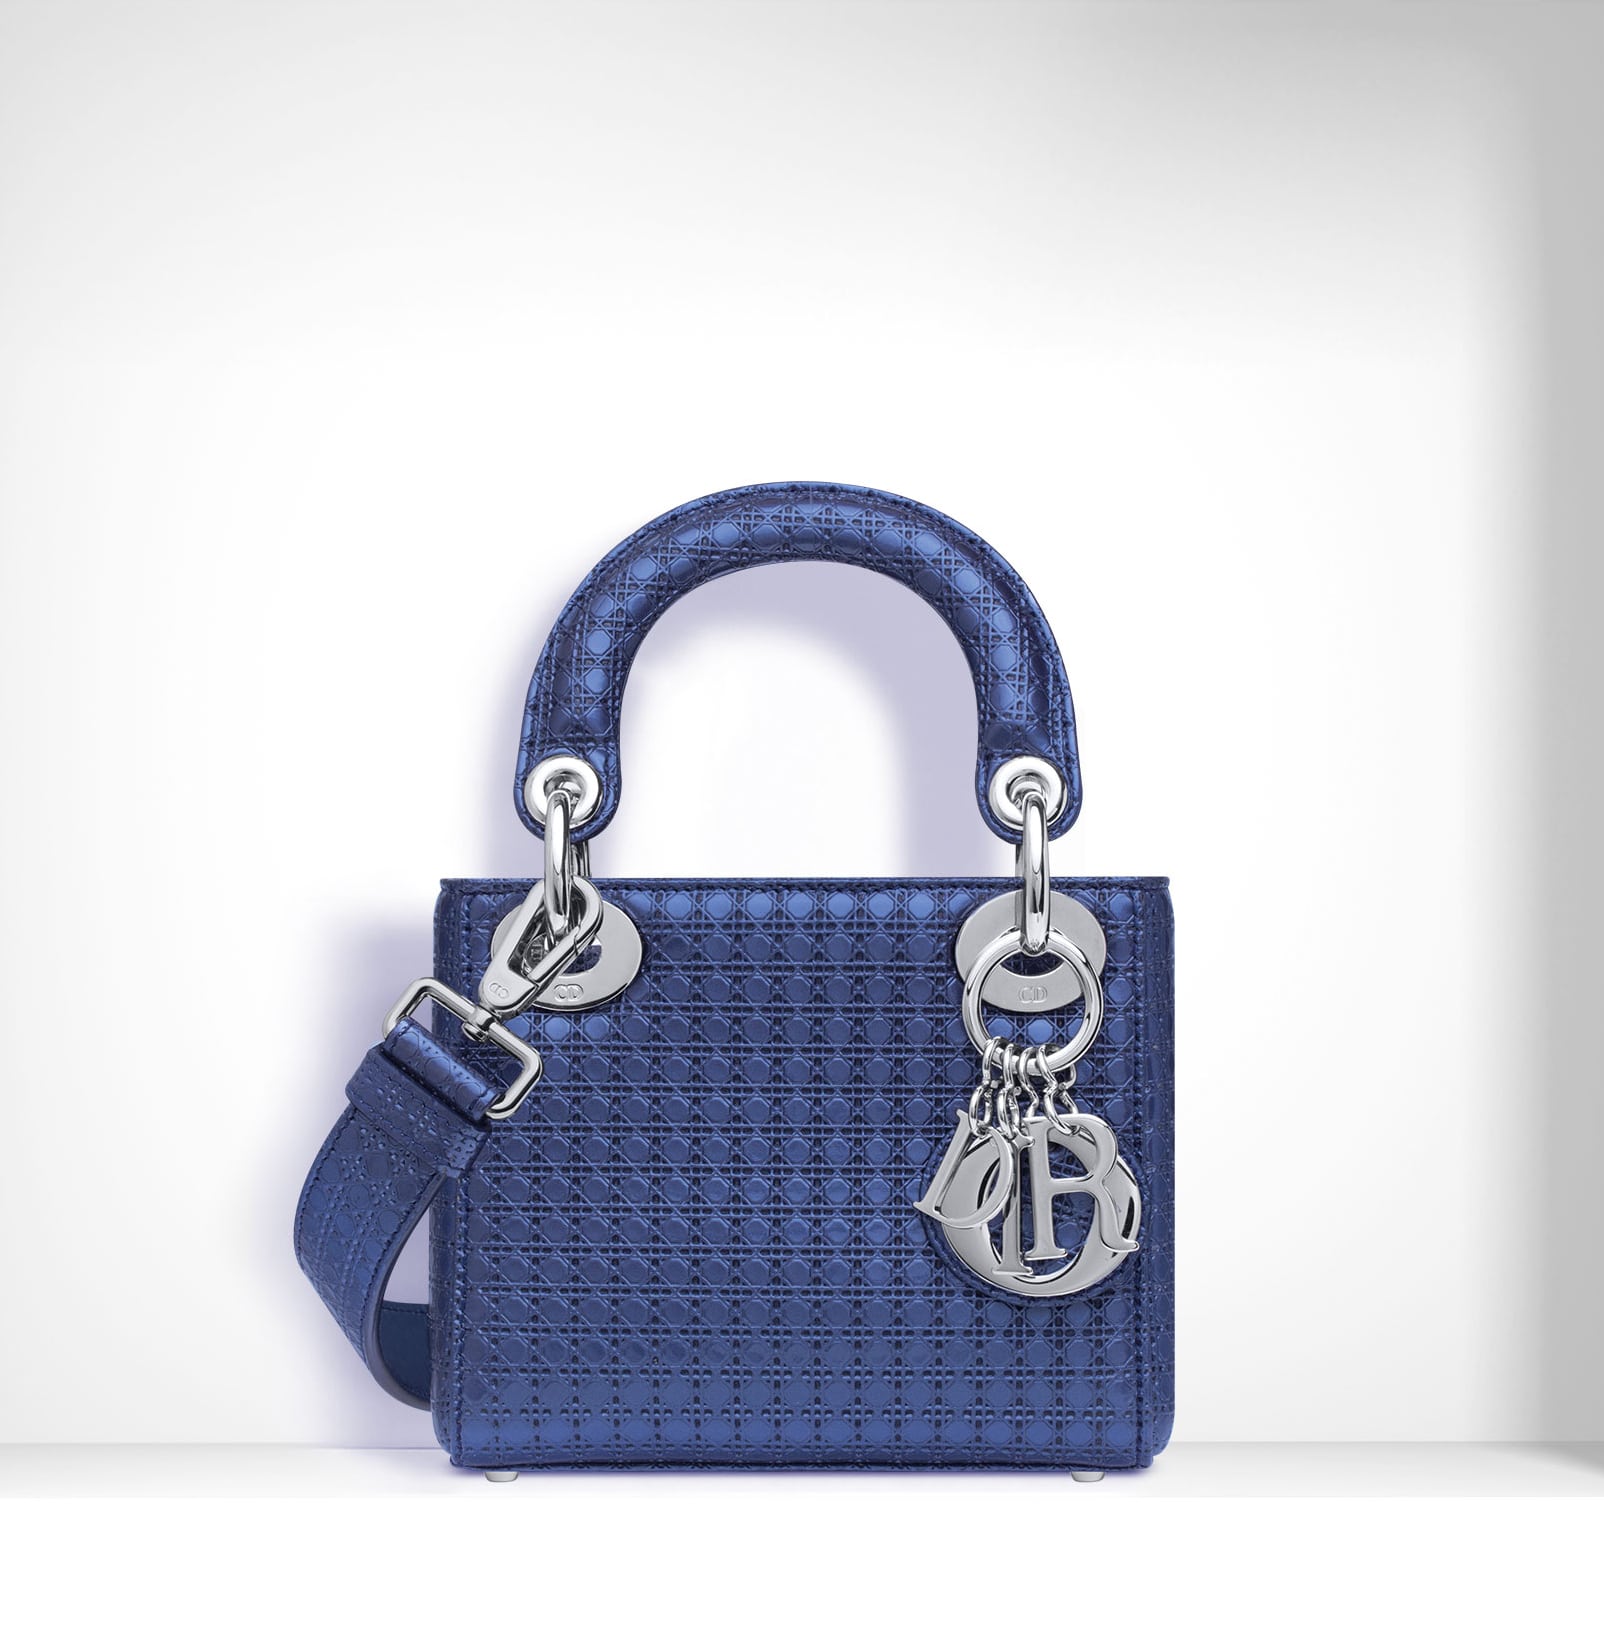 Diorama and Lady Dior Metallic Perforated Bags from Pre-Fall 2015